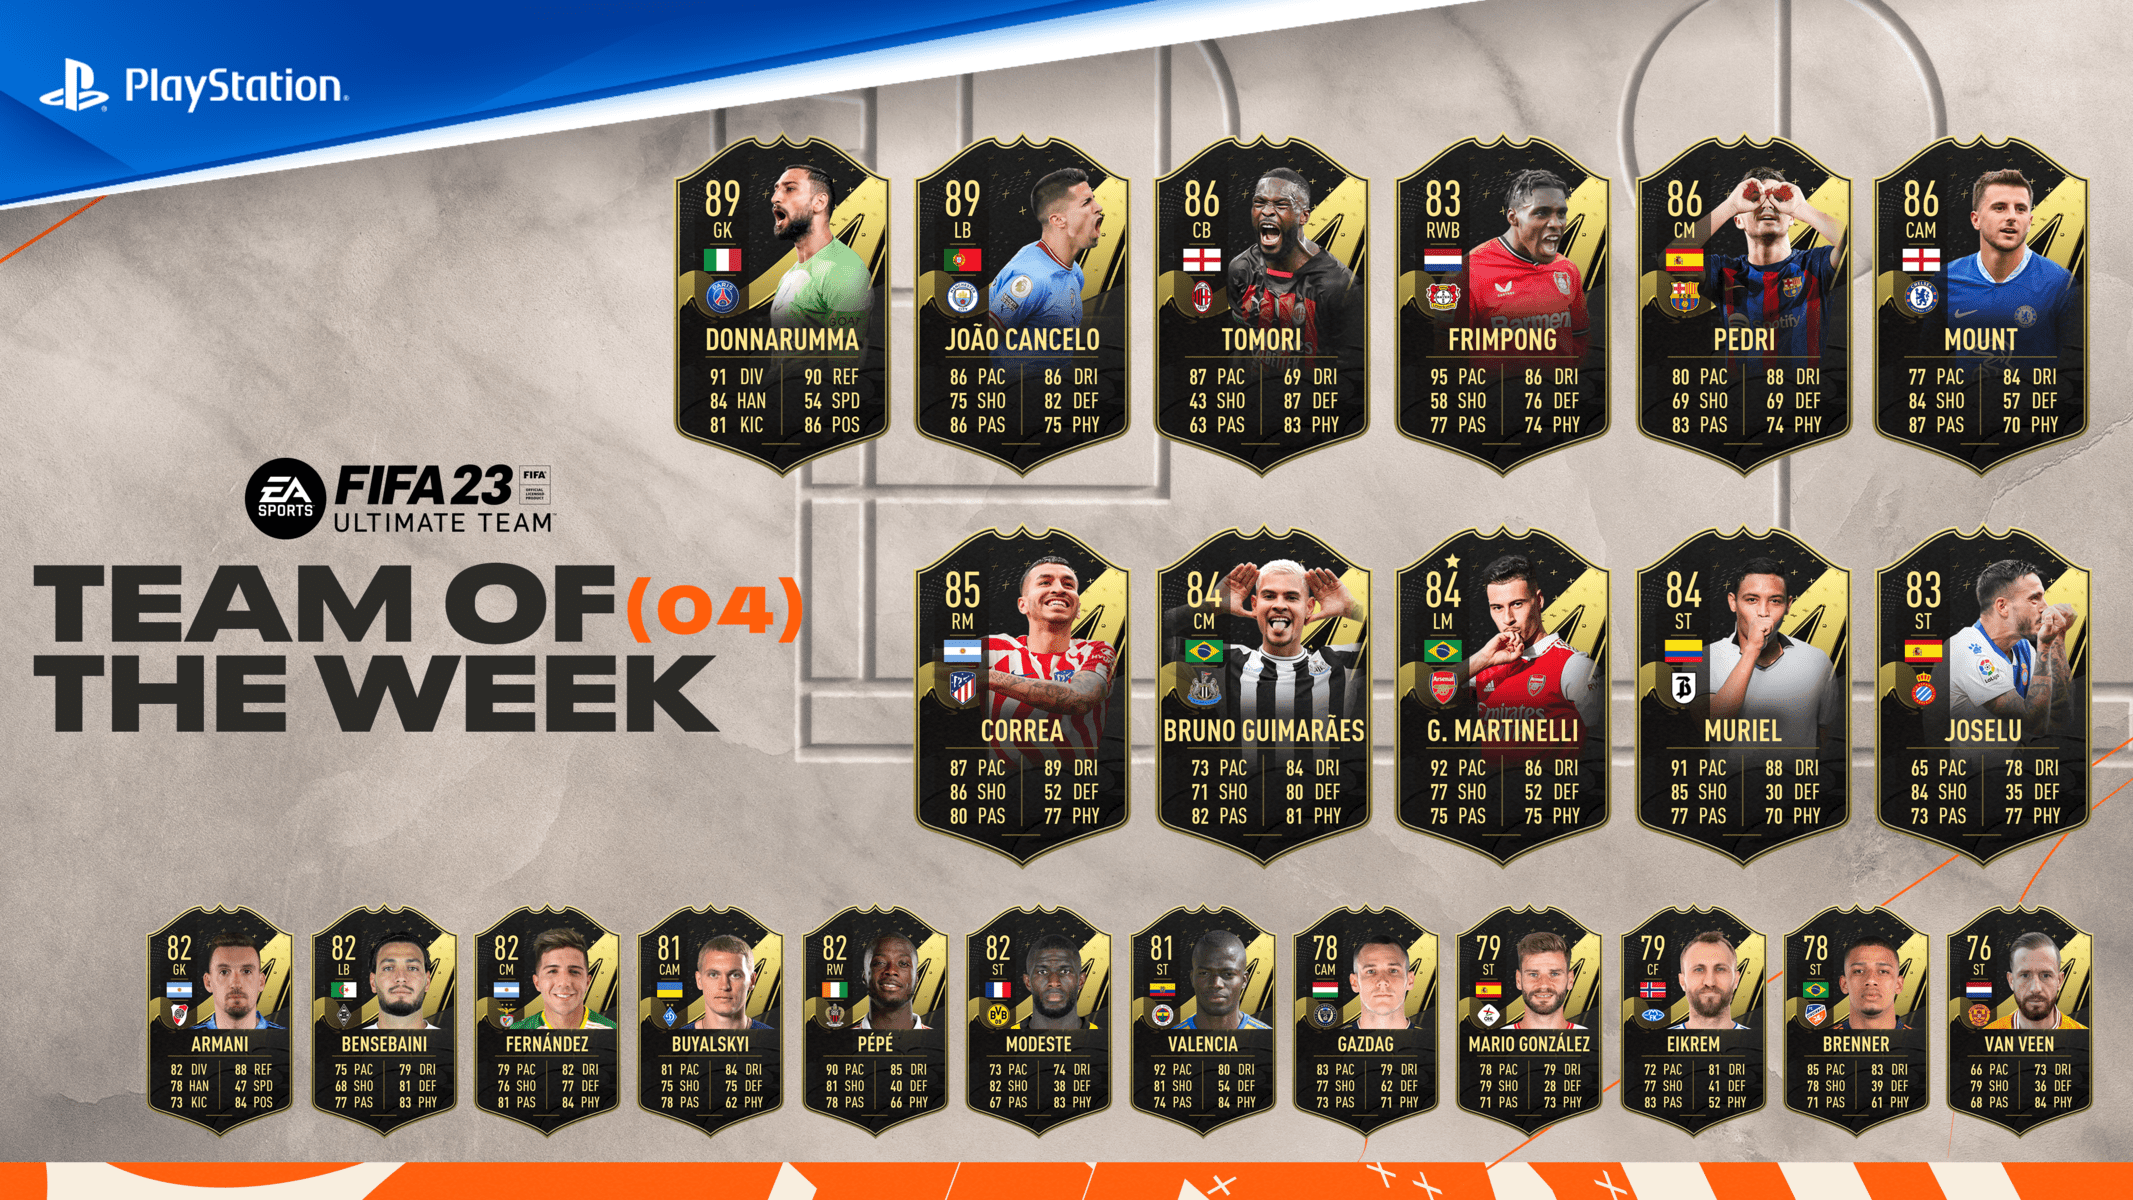 *BREAKING* FIFA 23 TOTW 4 REVEALED – Release Time, Player Reveals And More